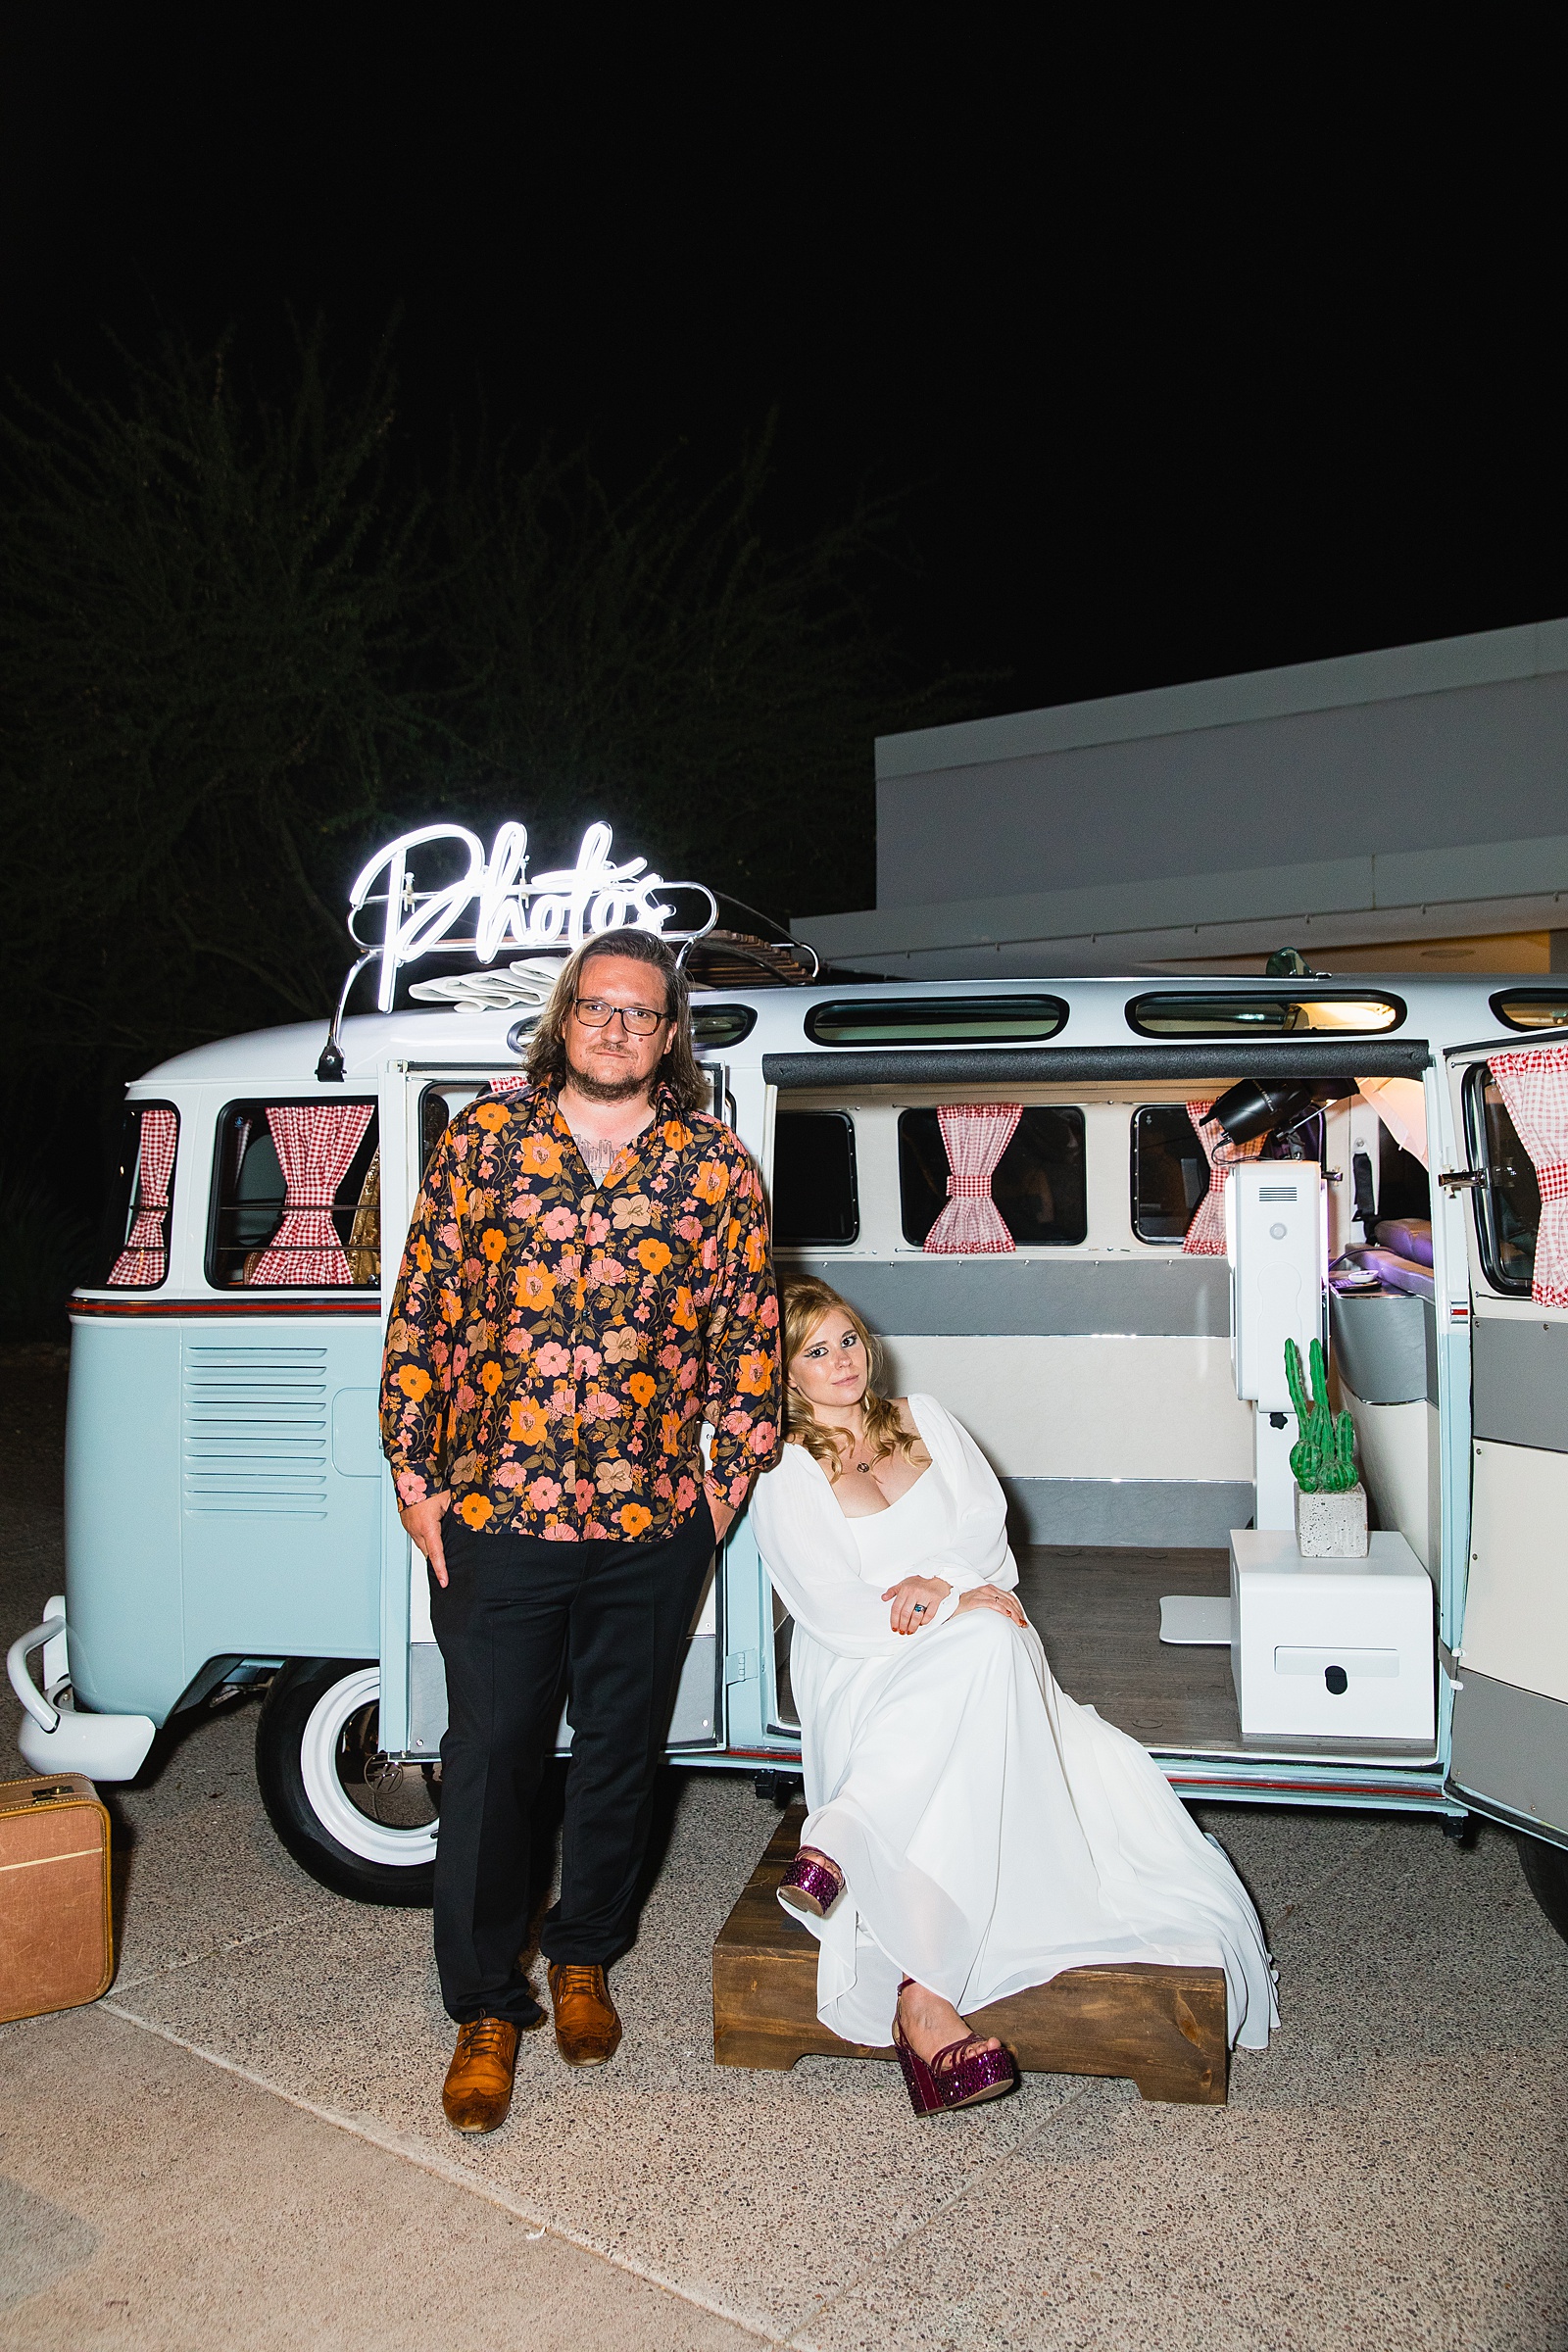 Bride and Groom take photos in retro VW Bus photo booth at Mountain Shadows Resort wedding reception by Paradise Valley wedding photographer PMA Photography